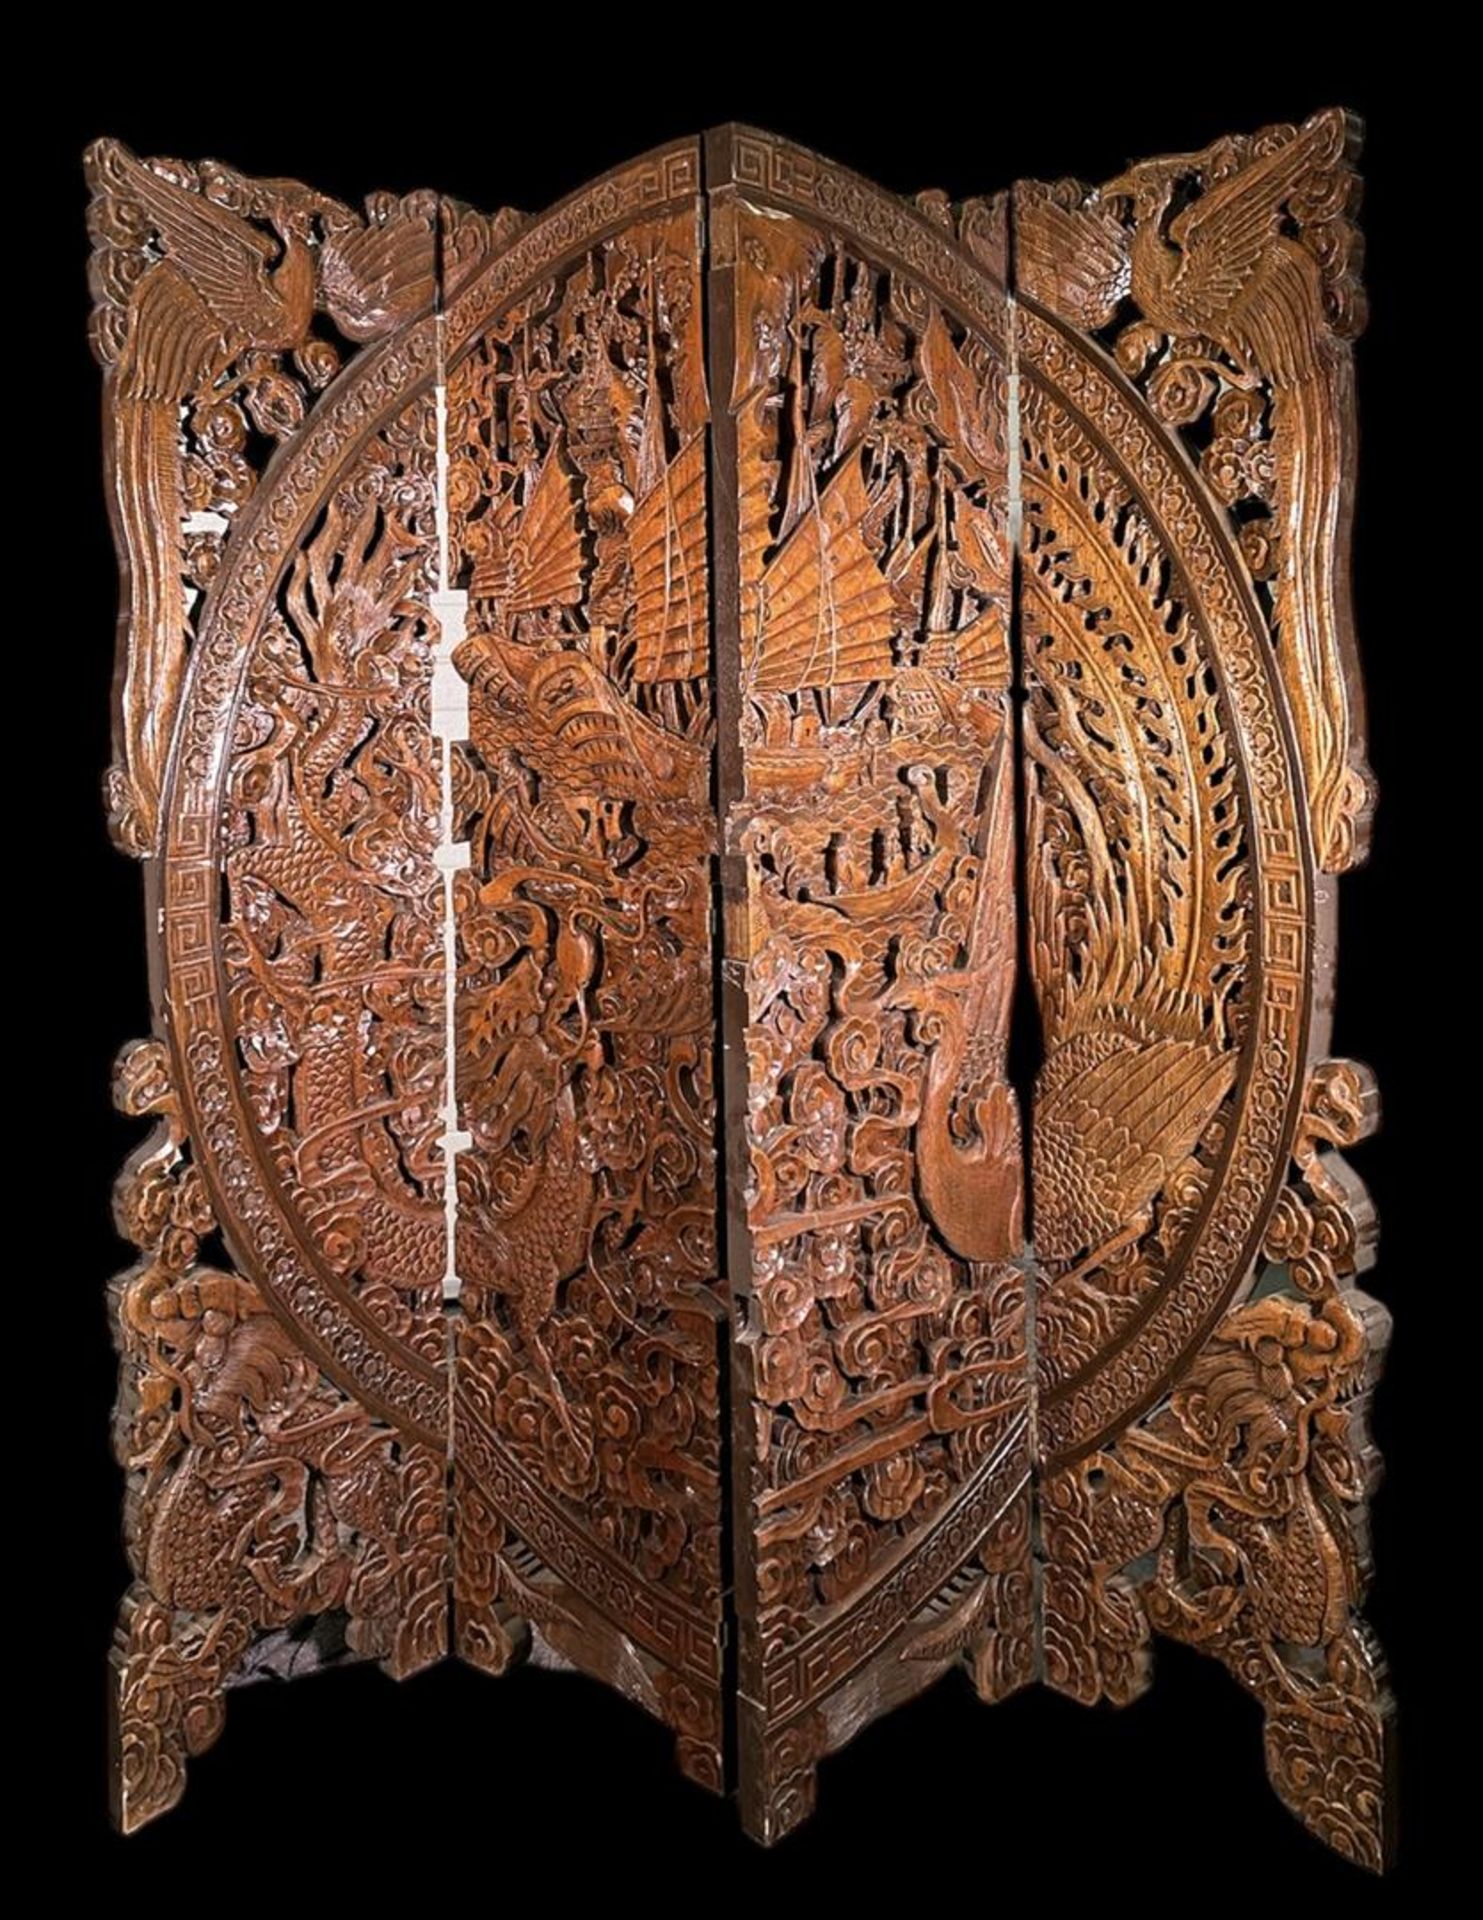 A richly carved folding screen, Indonesia/China, 20th century.
180 x 155 cm.